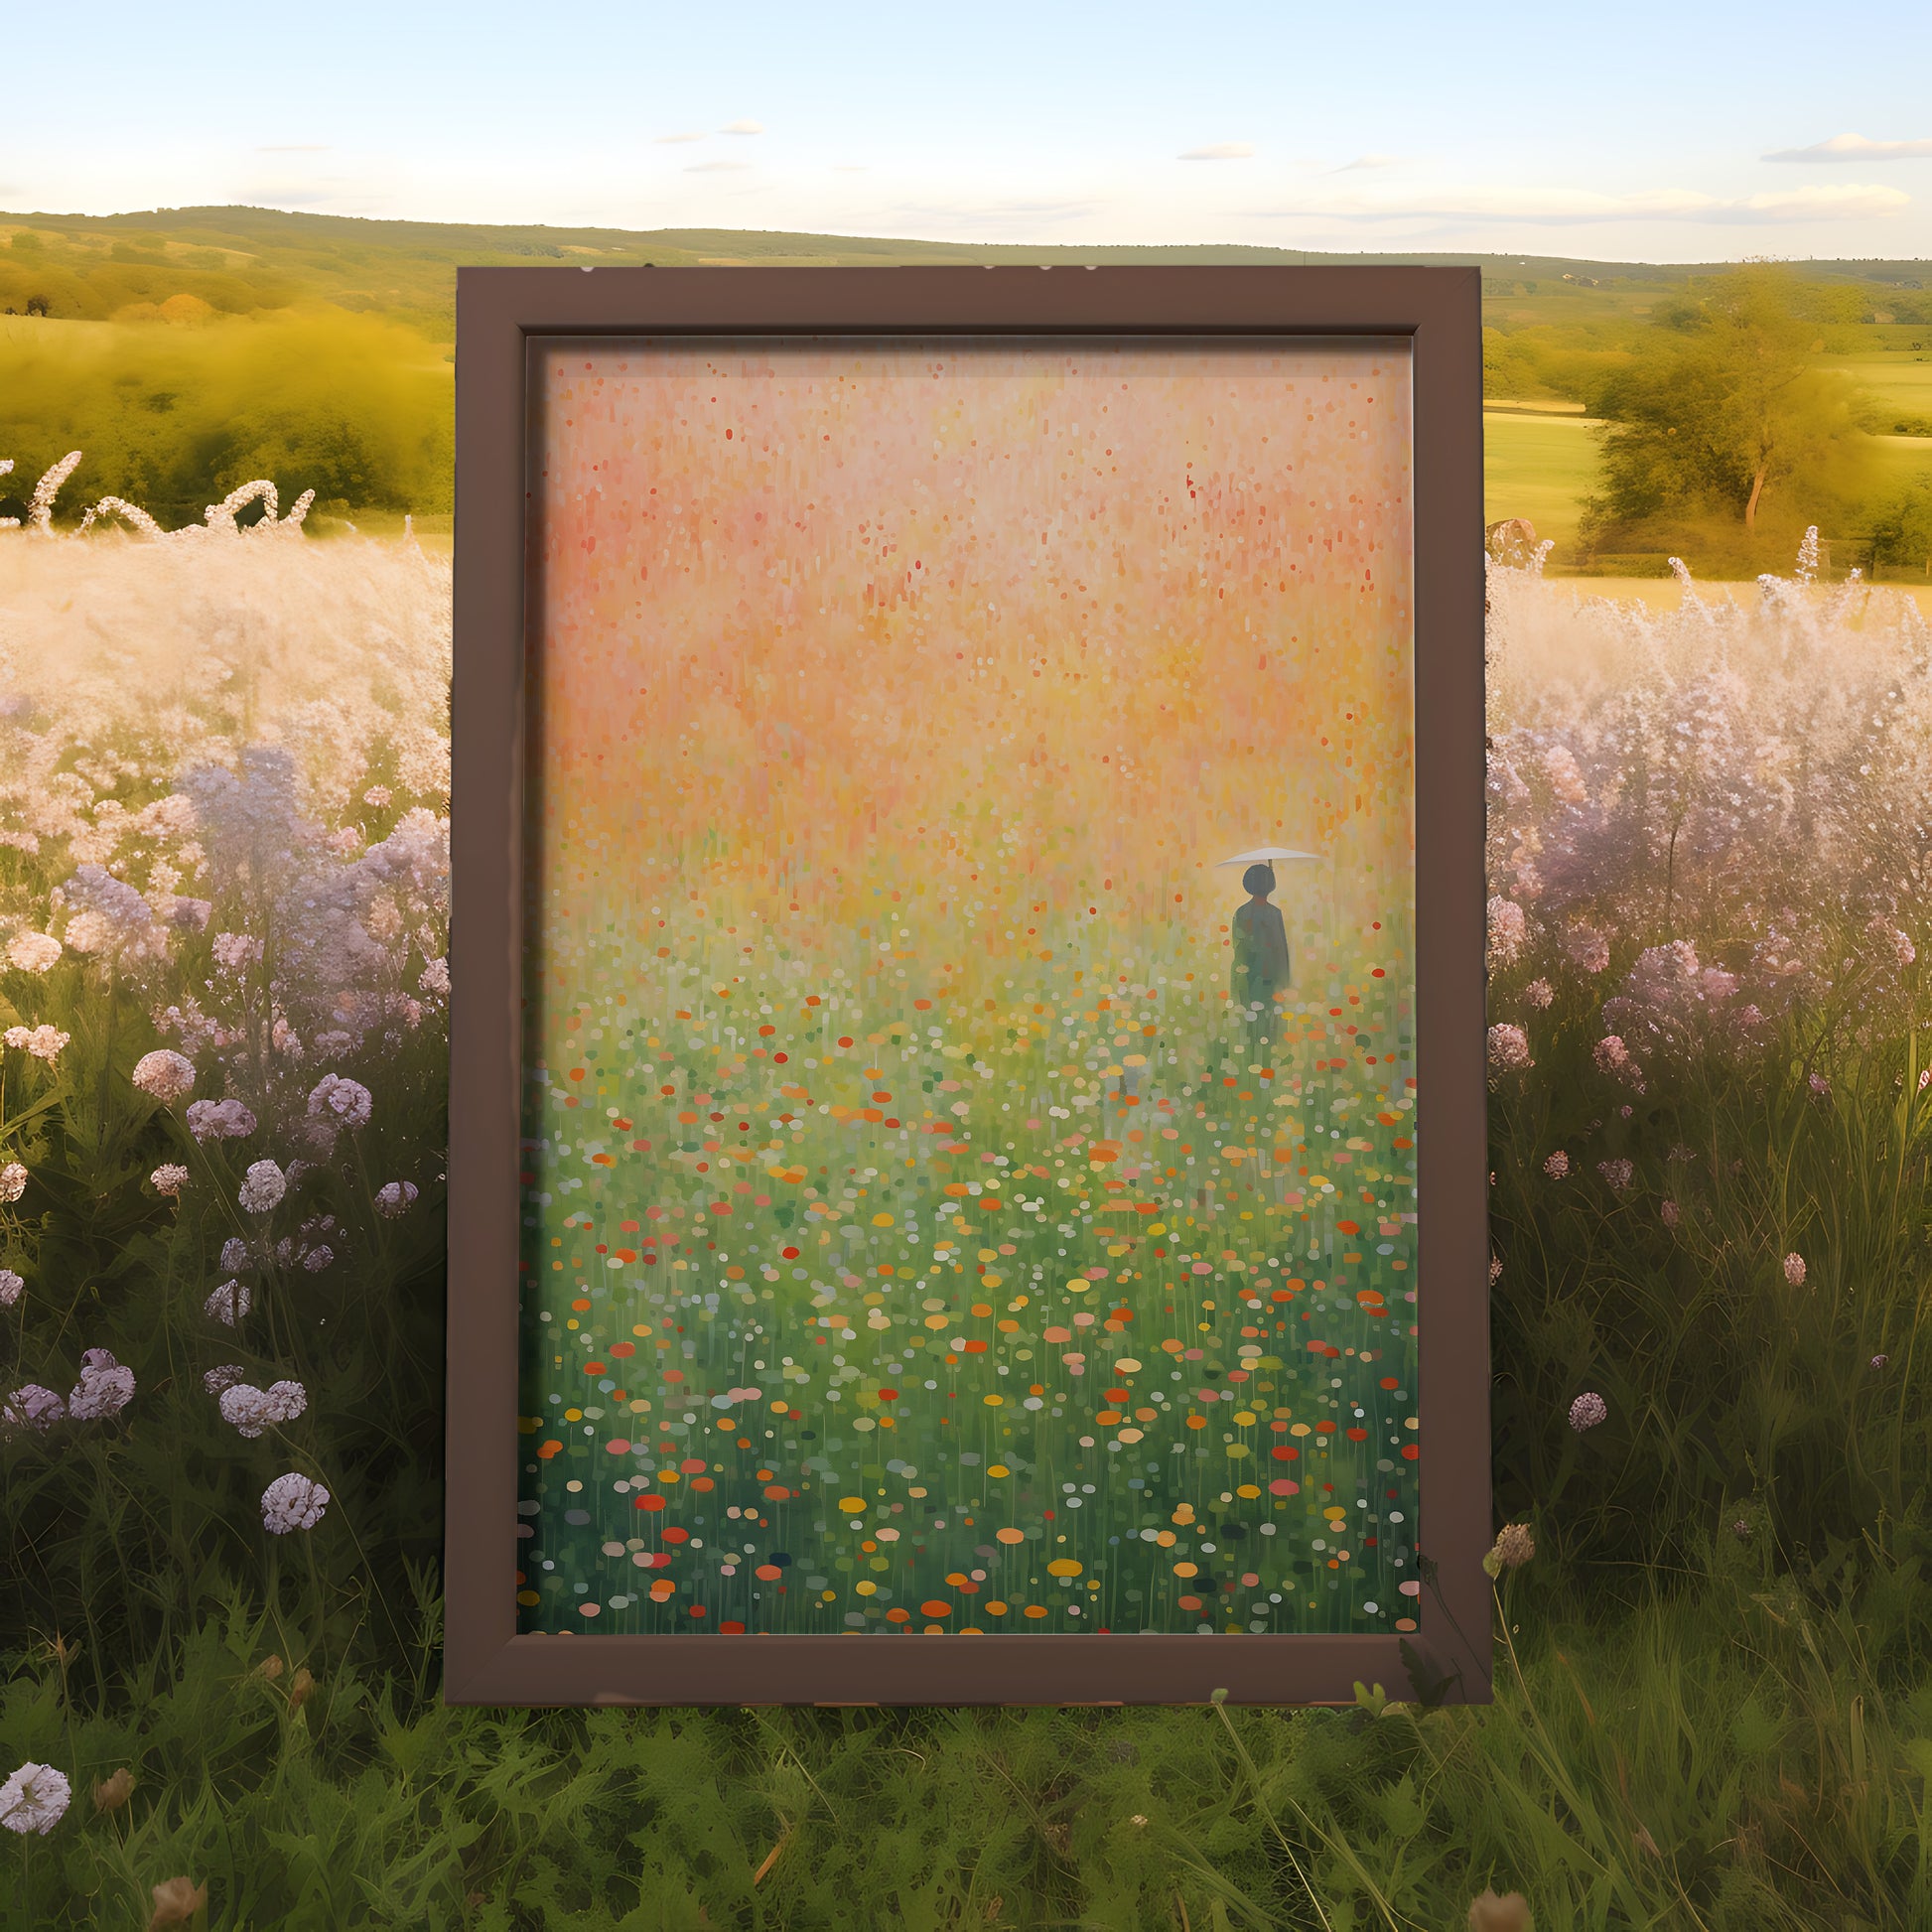 A large painting of a colorful field placed in an actual field, blending art with nature.